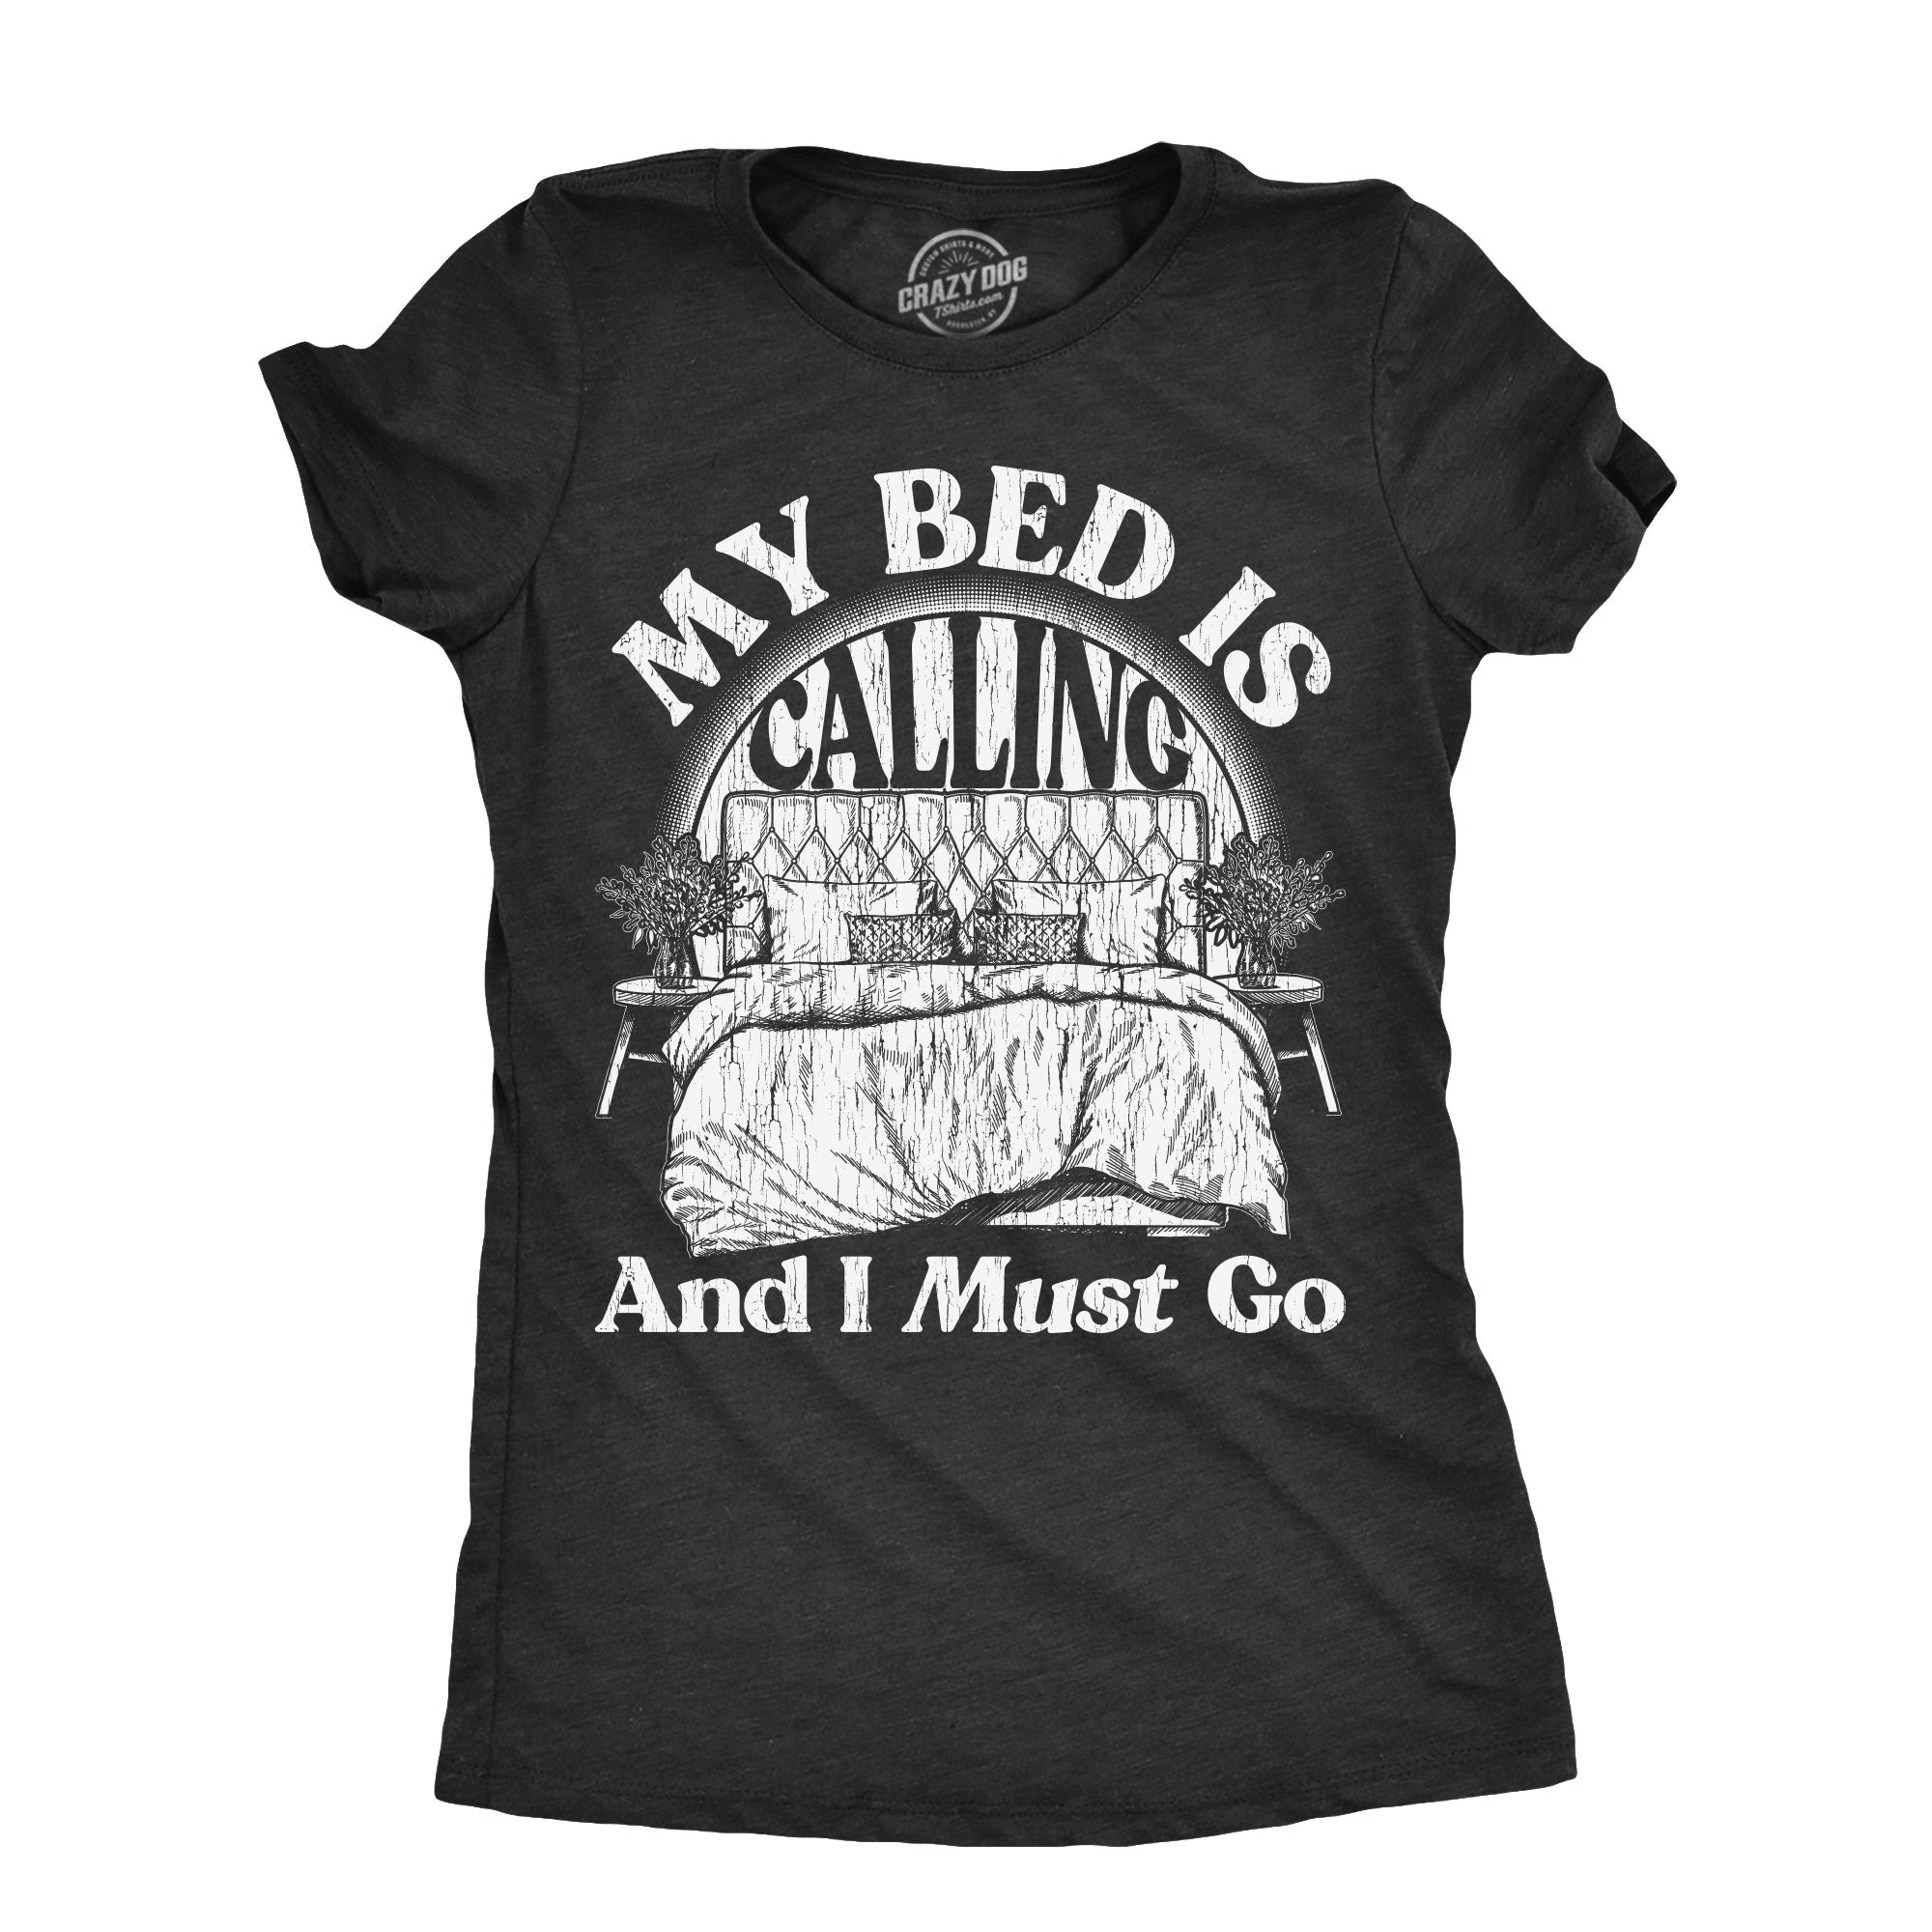 Funny Heather Black - BED My Bed Is Calling And I Must Go Womens T Shirt Nerdy Sarcastic Tee